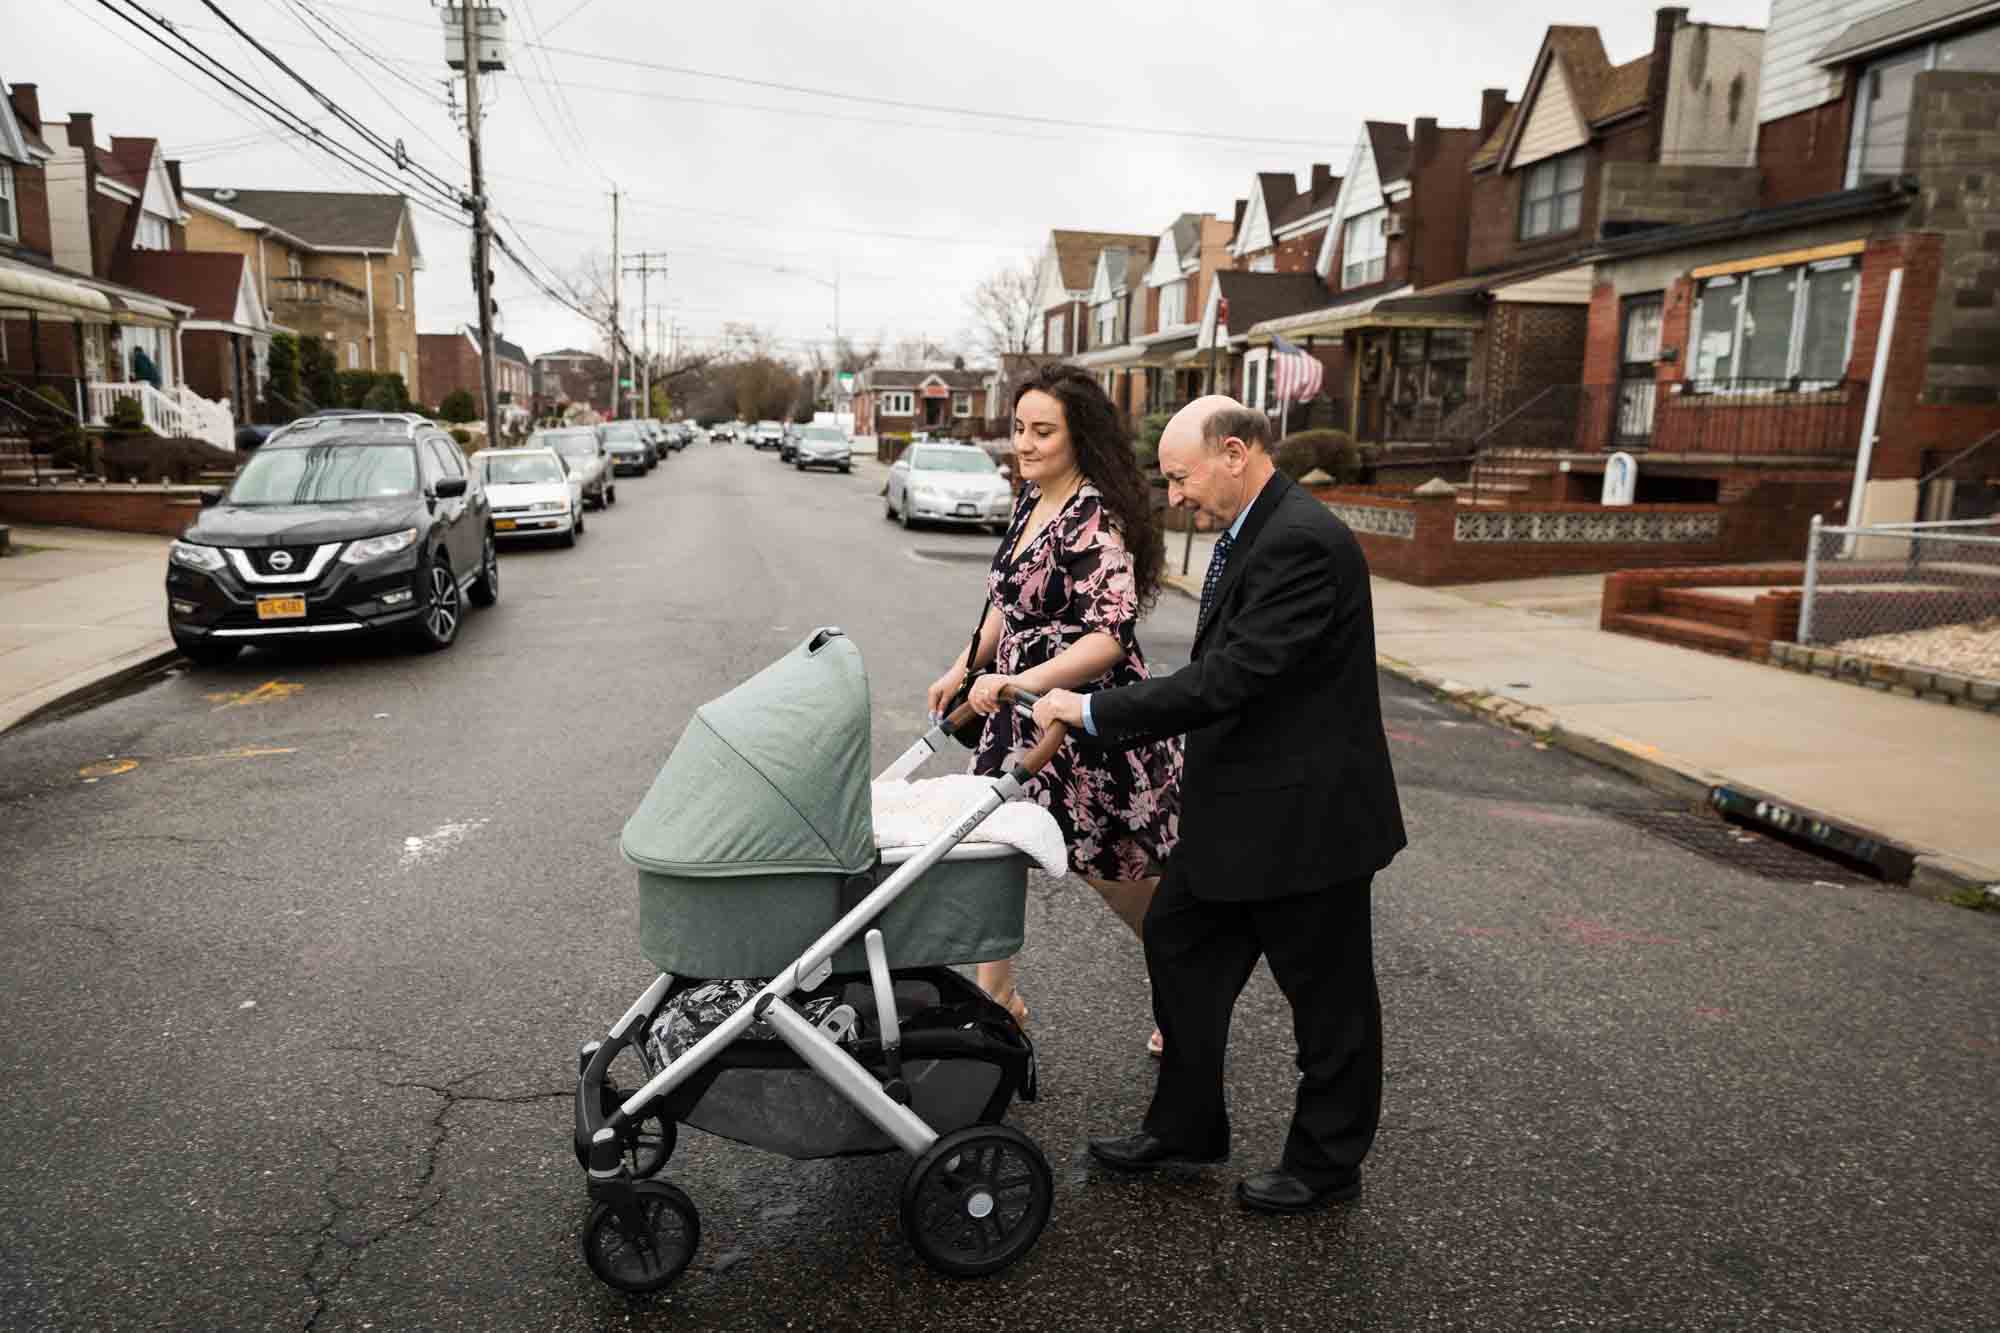 Mother and grandfather pushing baby carriage in middle of street